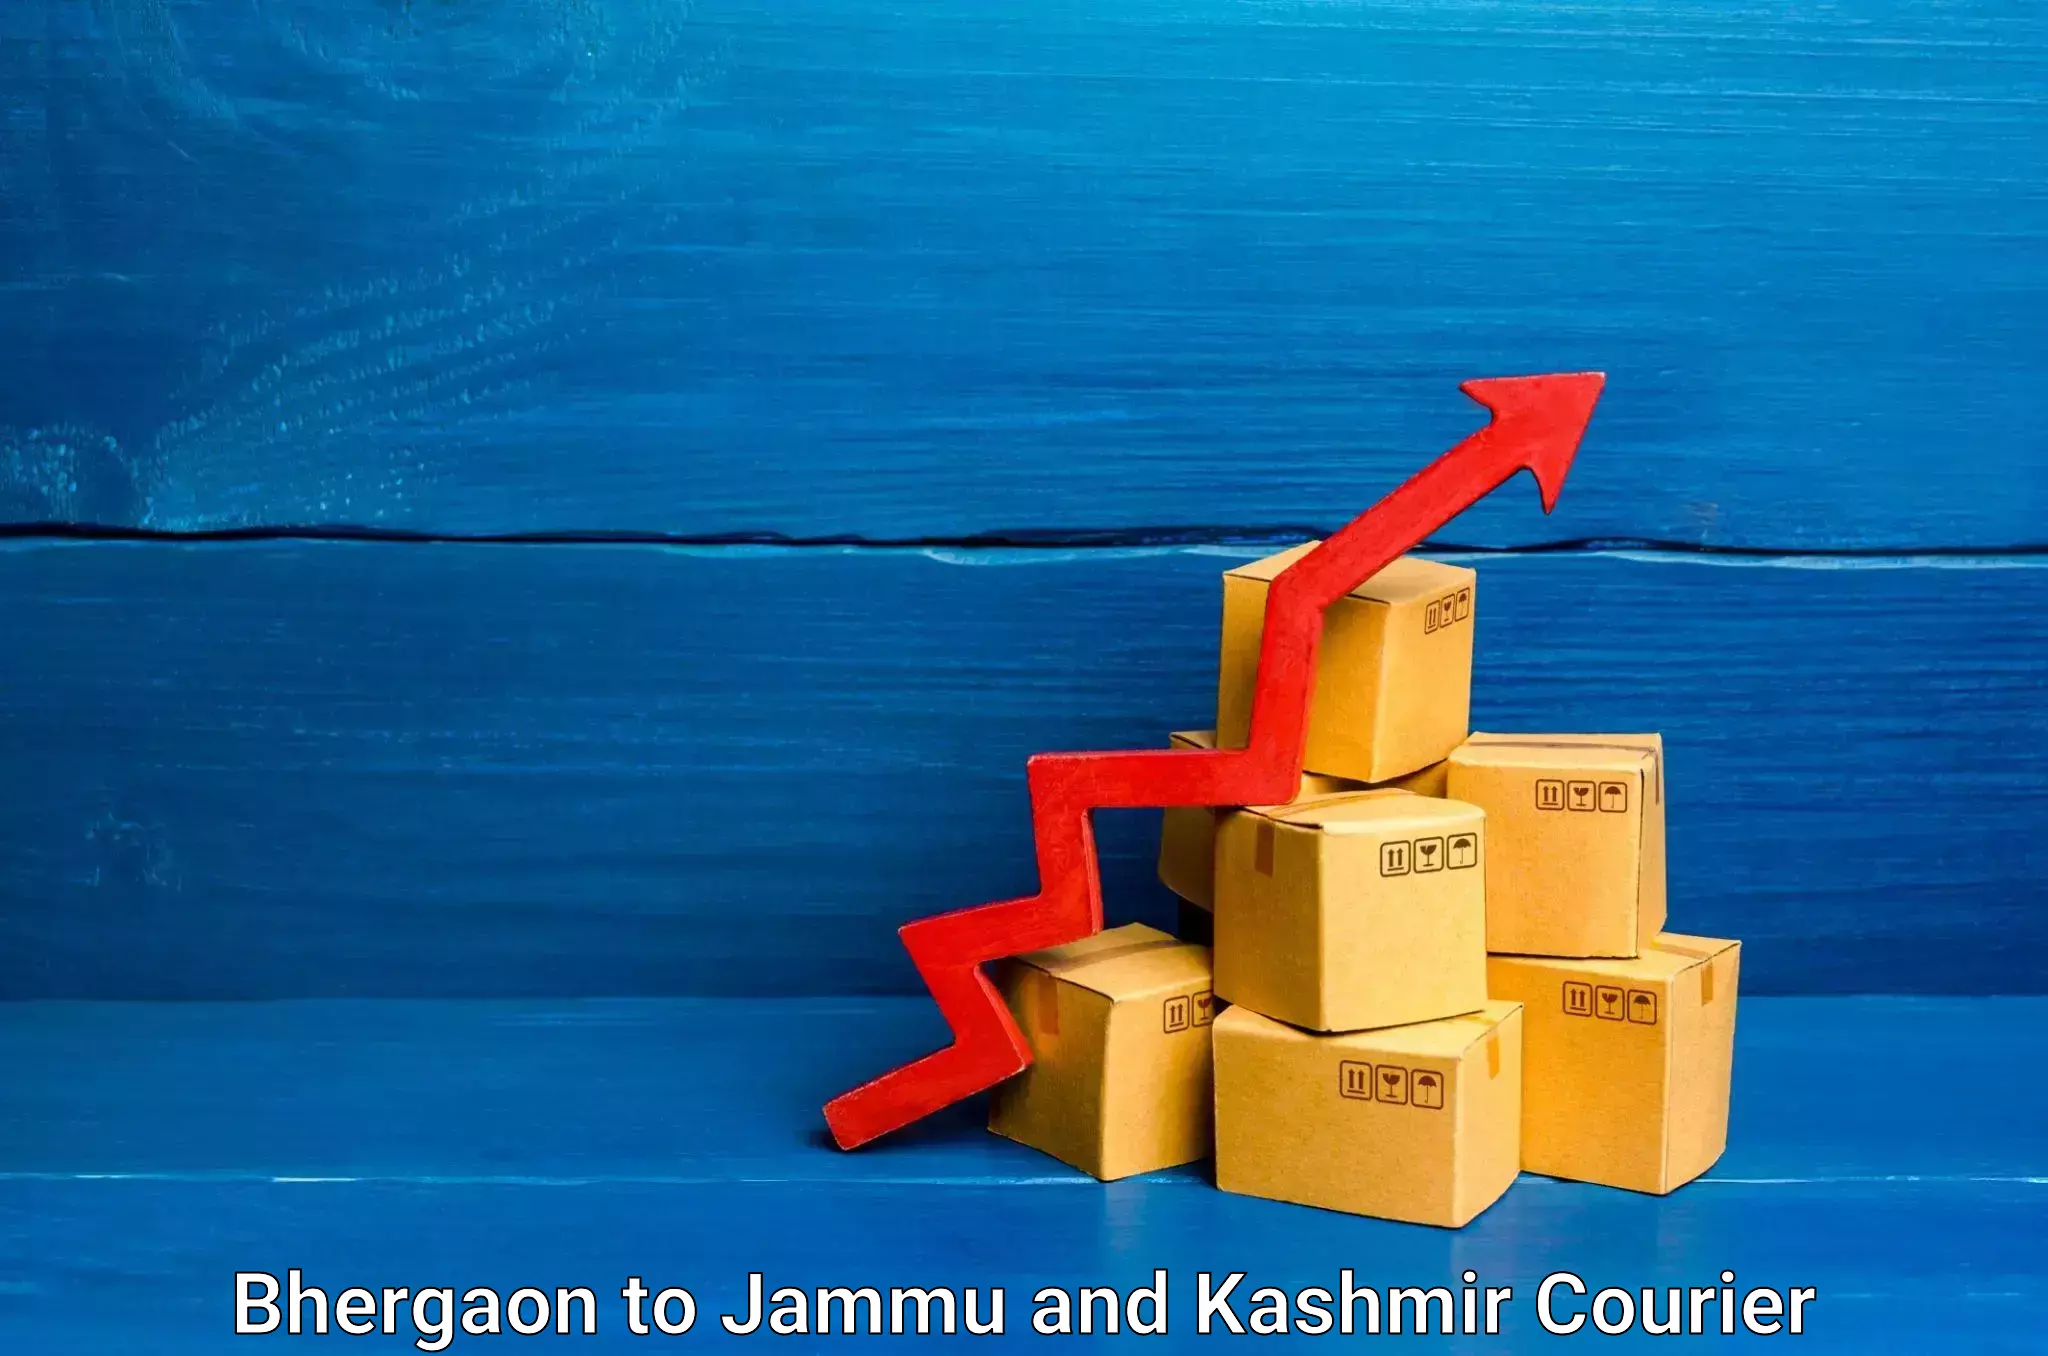 Parcel handling and care Bhergaon to Jammu and Kashmir